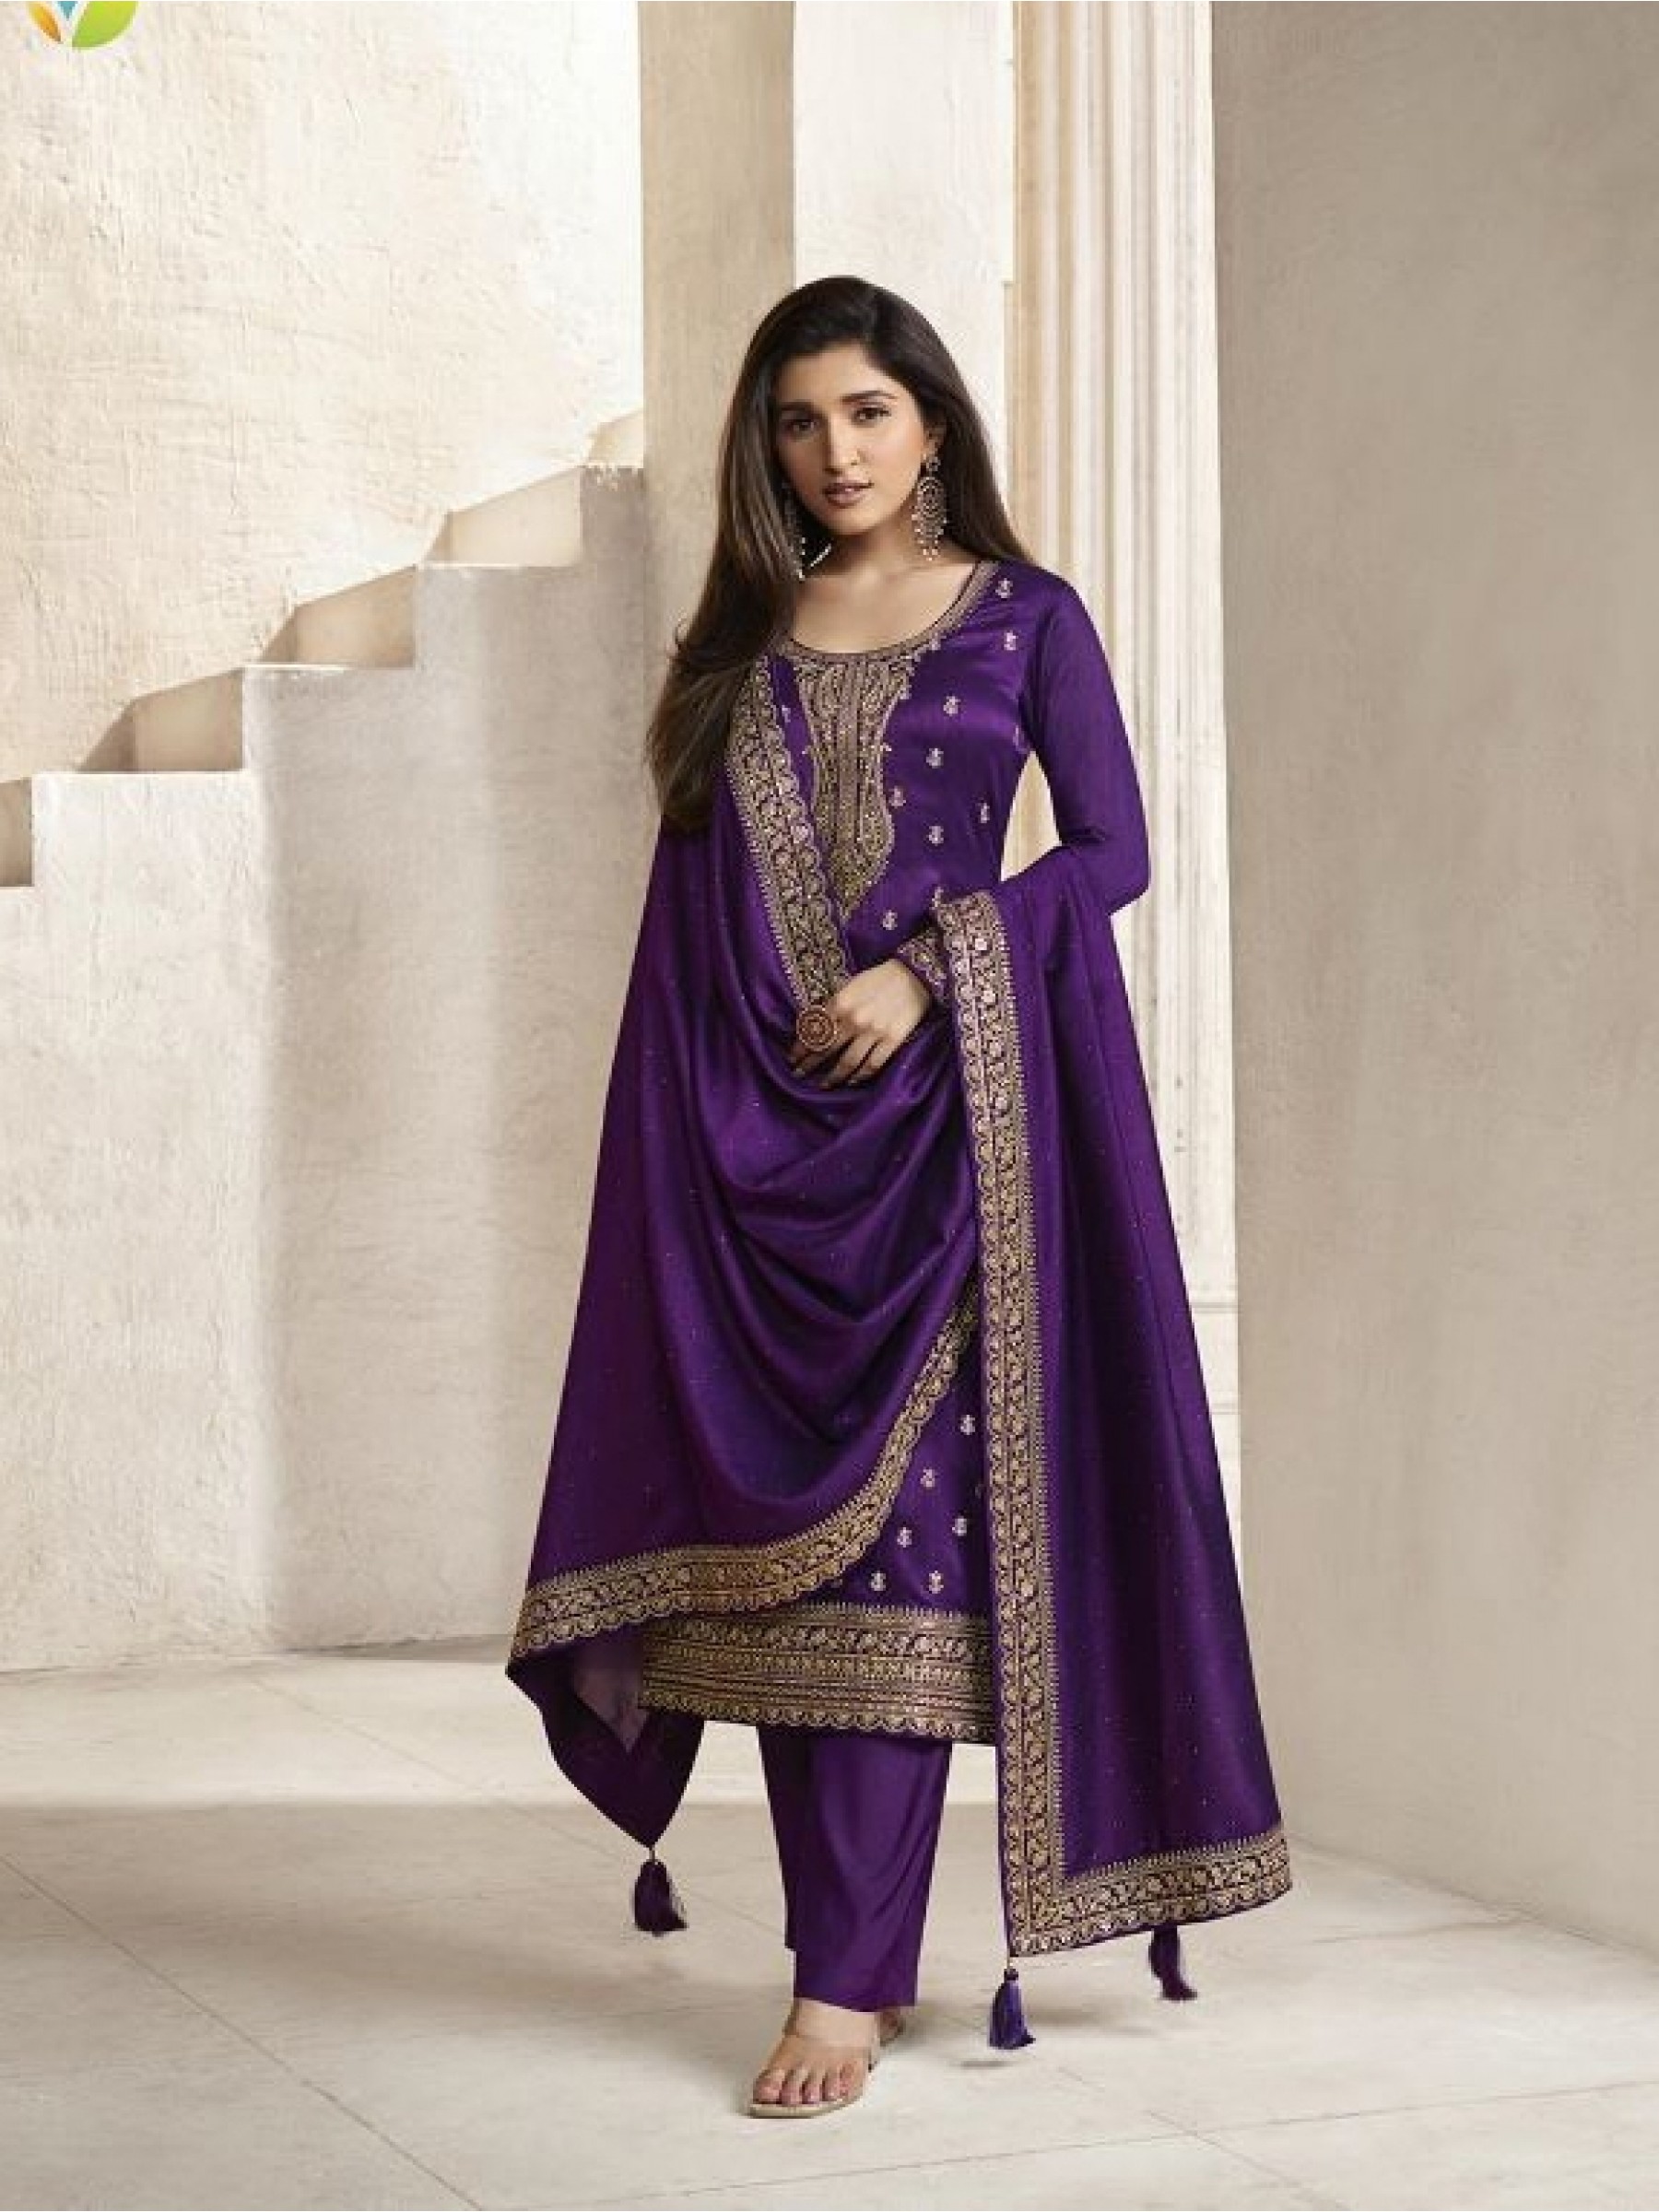  Silk Georgette  Party Wear Suit in Purple Color with Embroidery Work